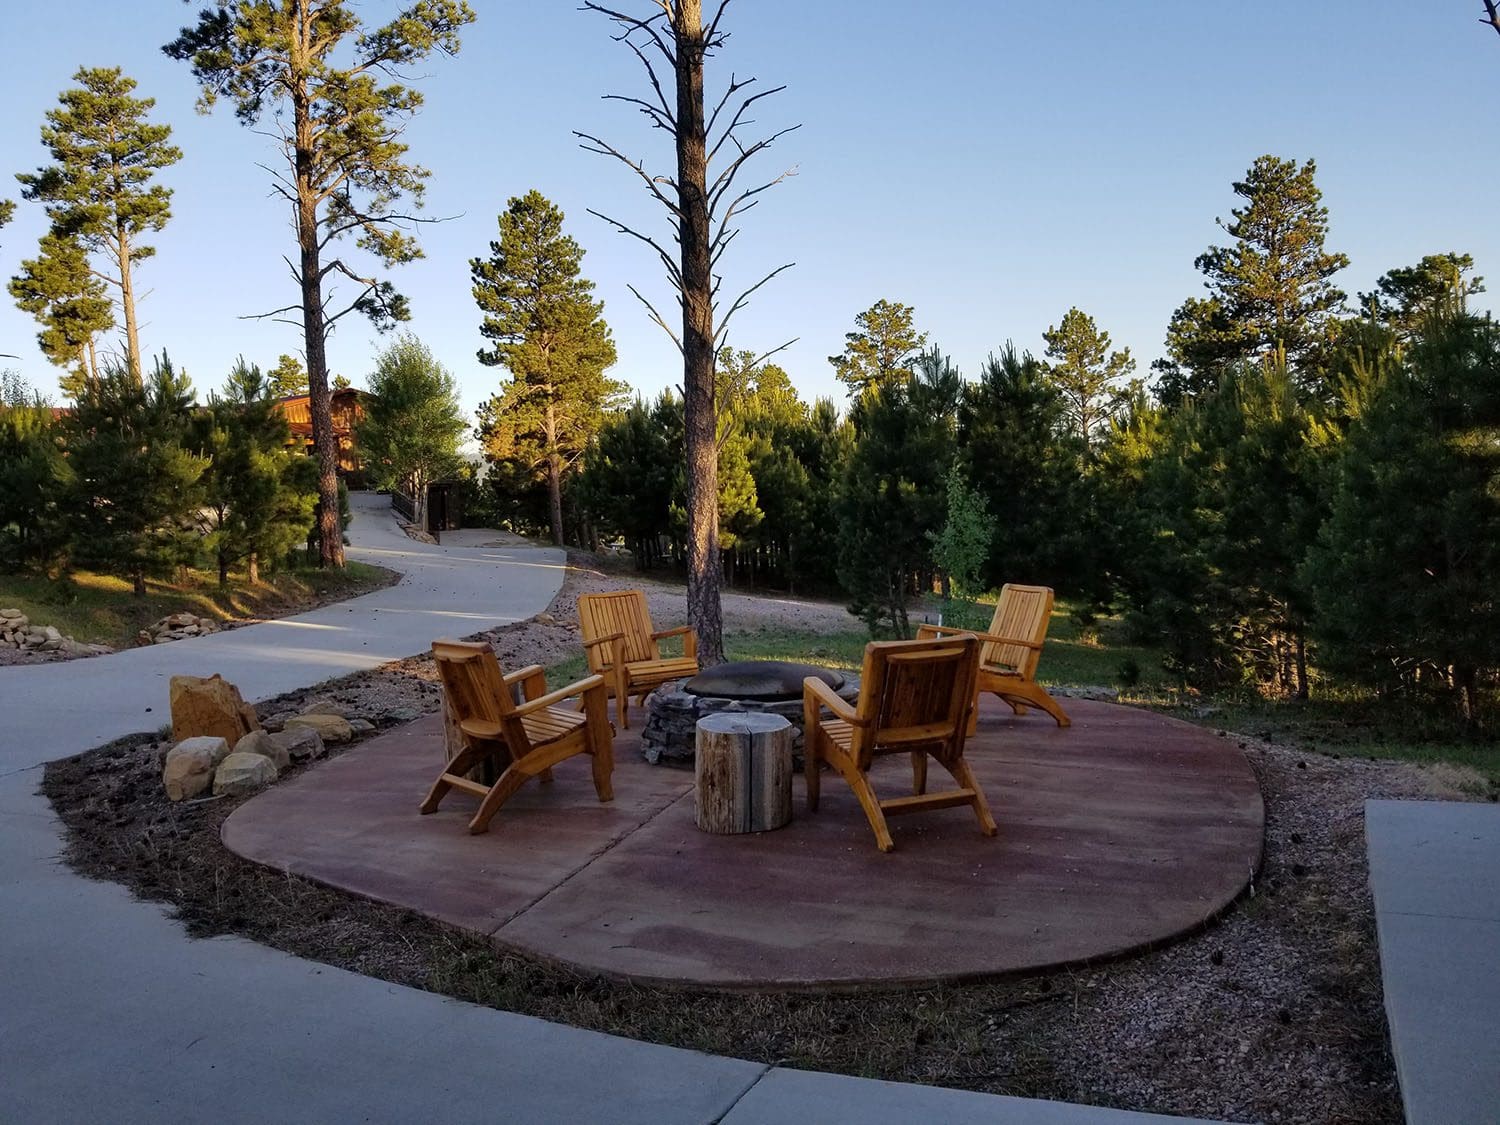 Outside patio view of fire pit and seating.